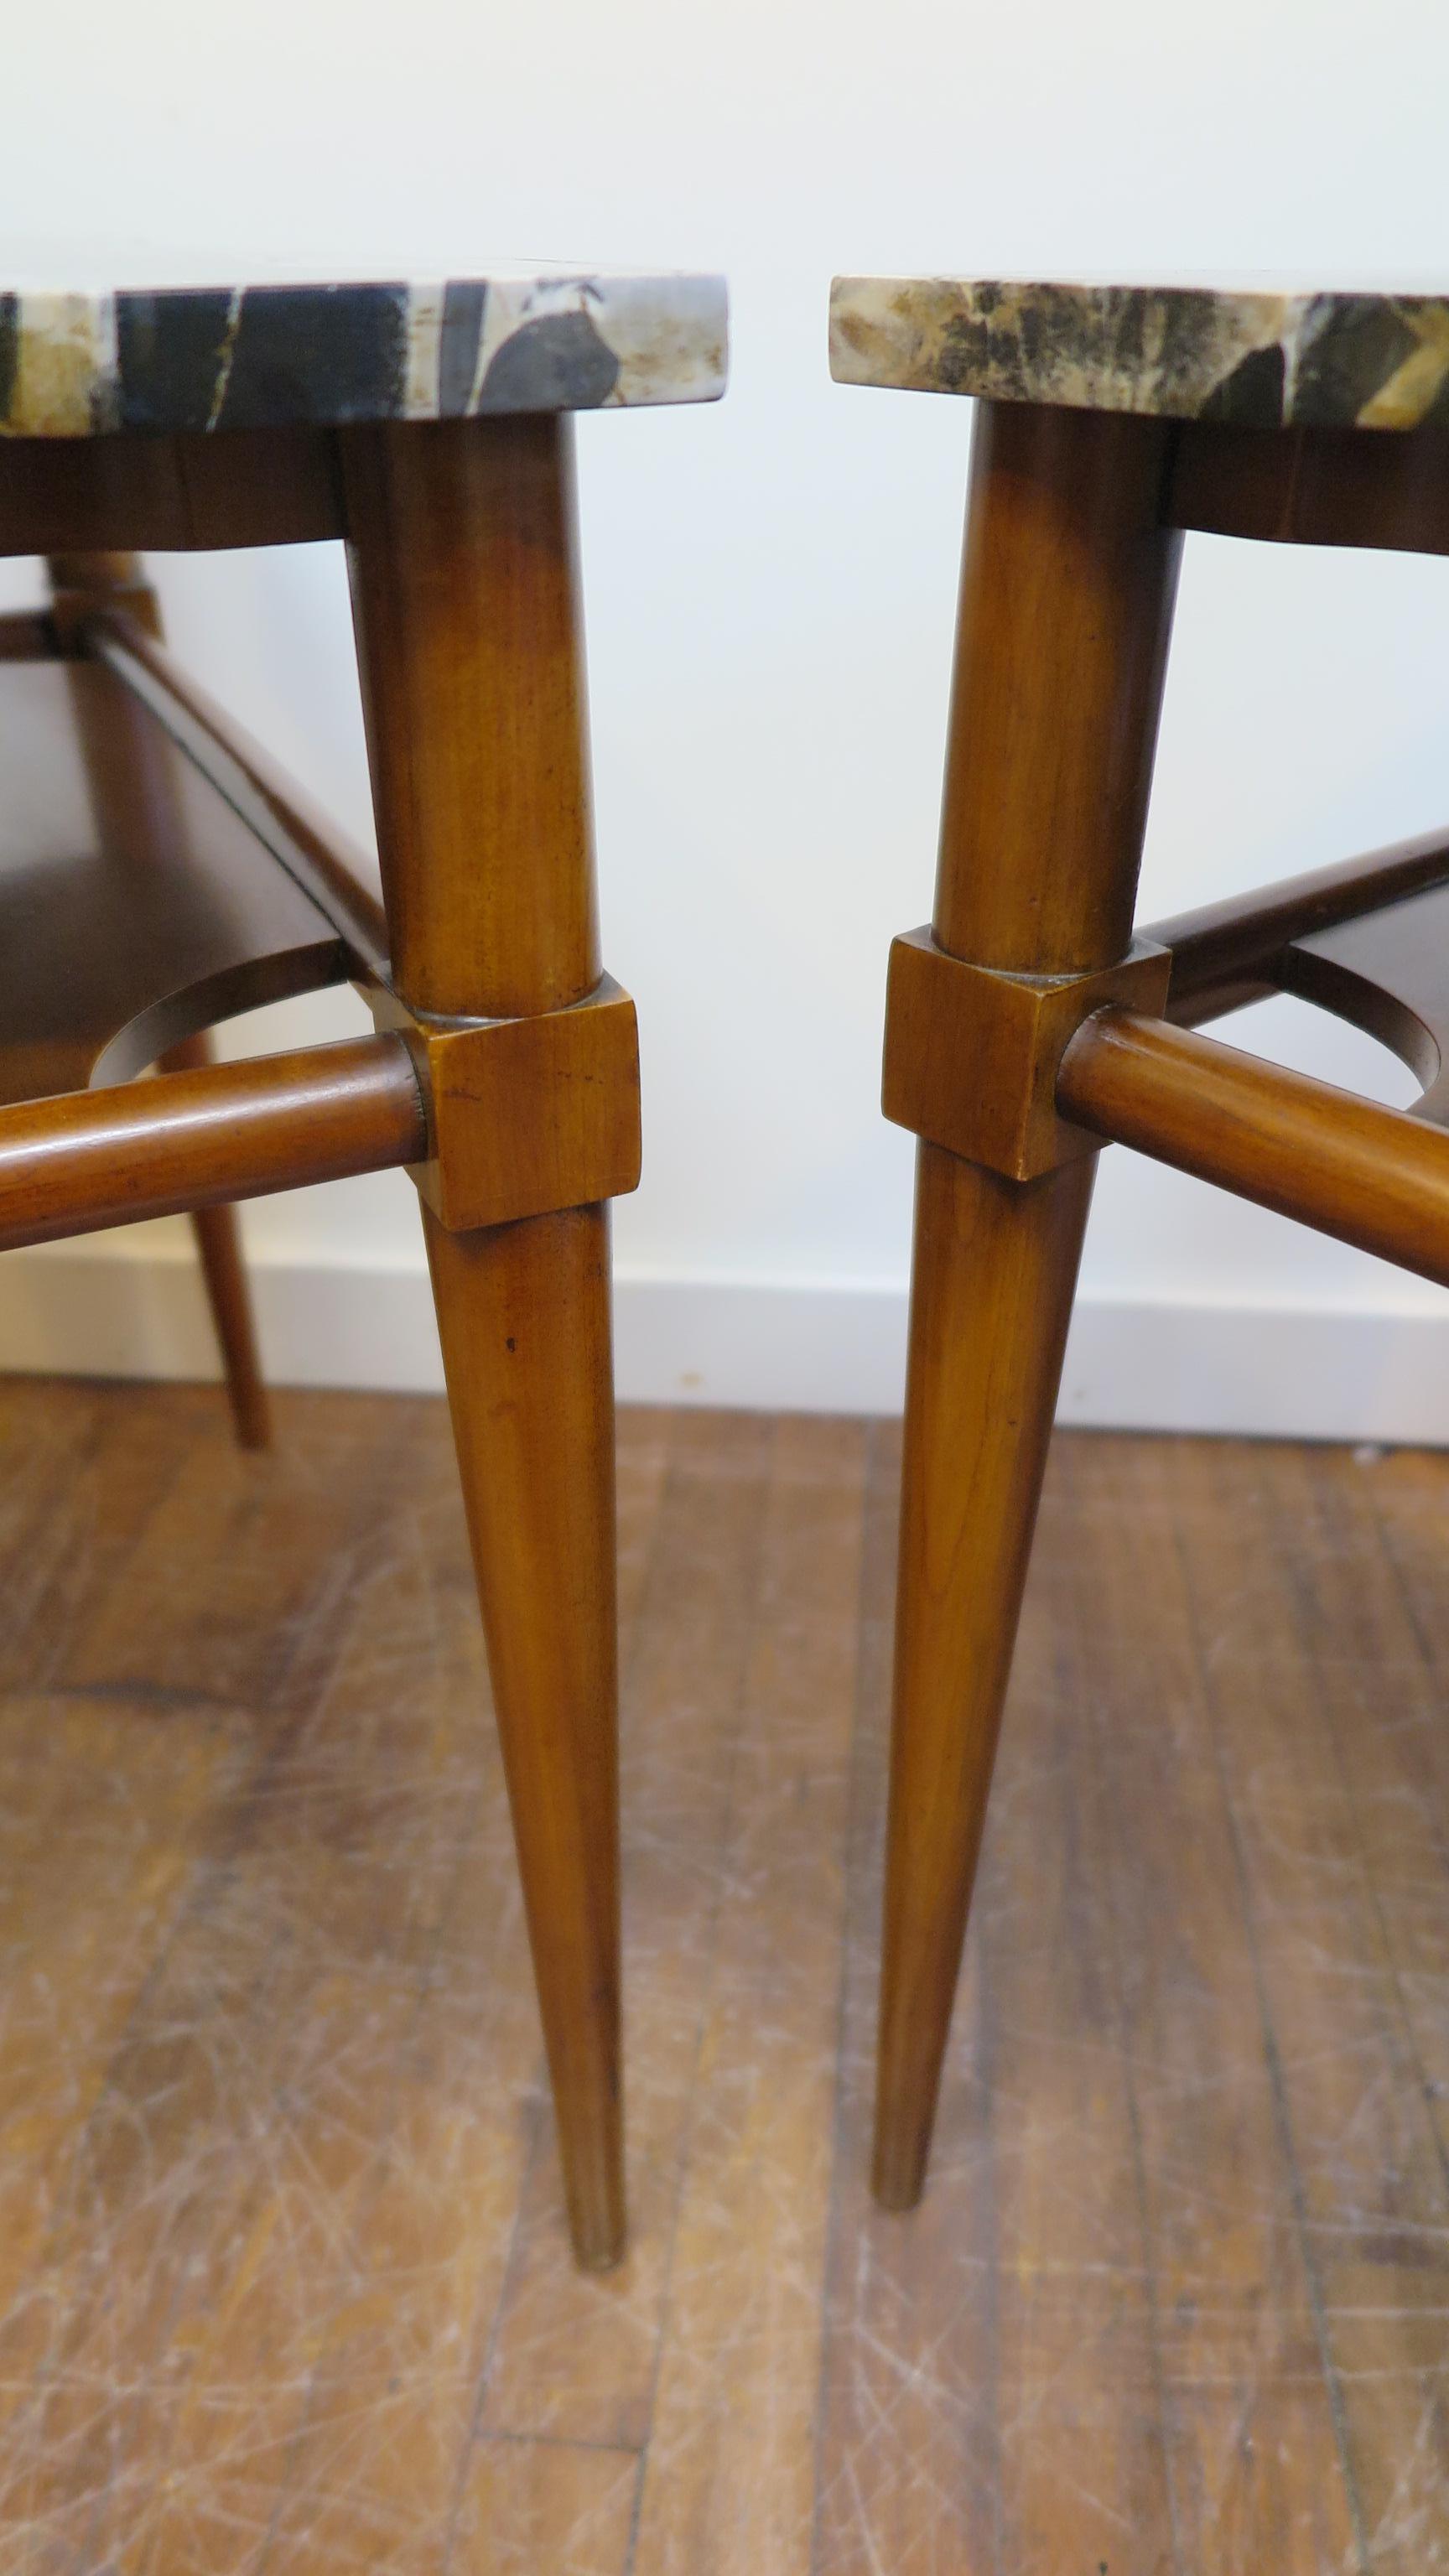 Mid-20th Century John Widdicomb Marble-Top Tables Attributed to T. H. Robsjohn Gibbings